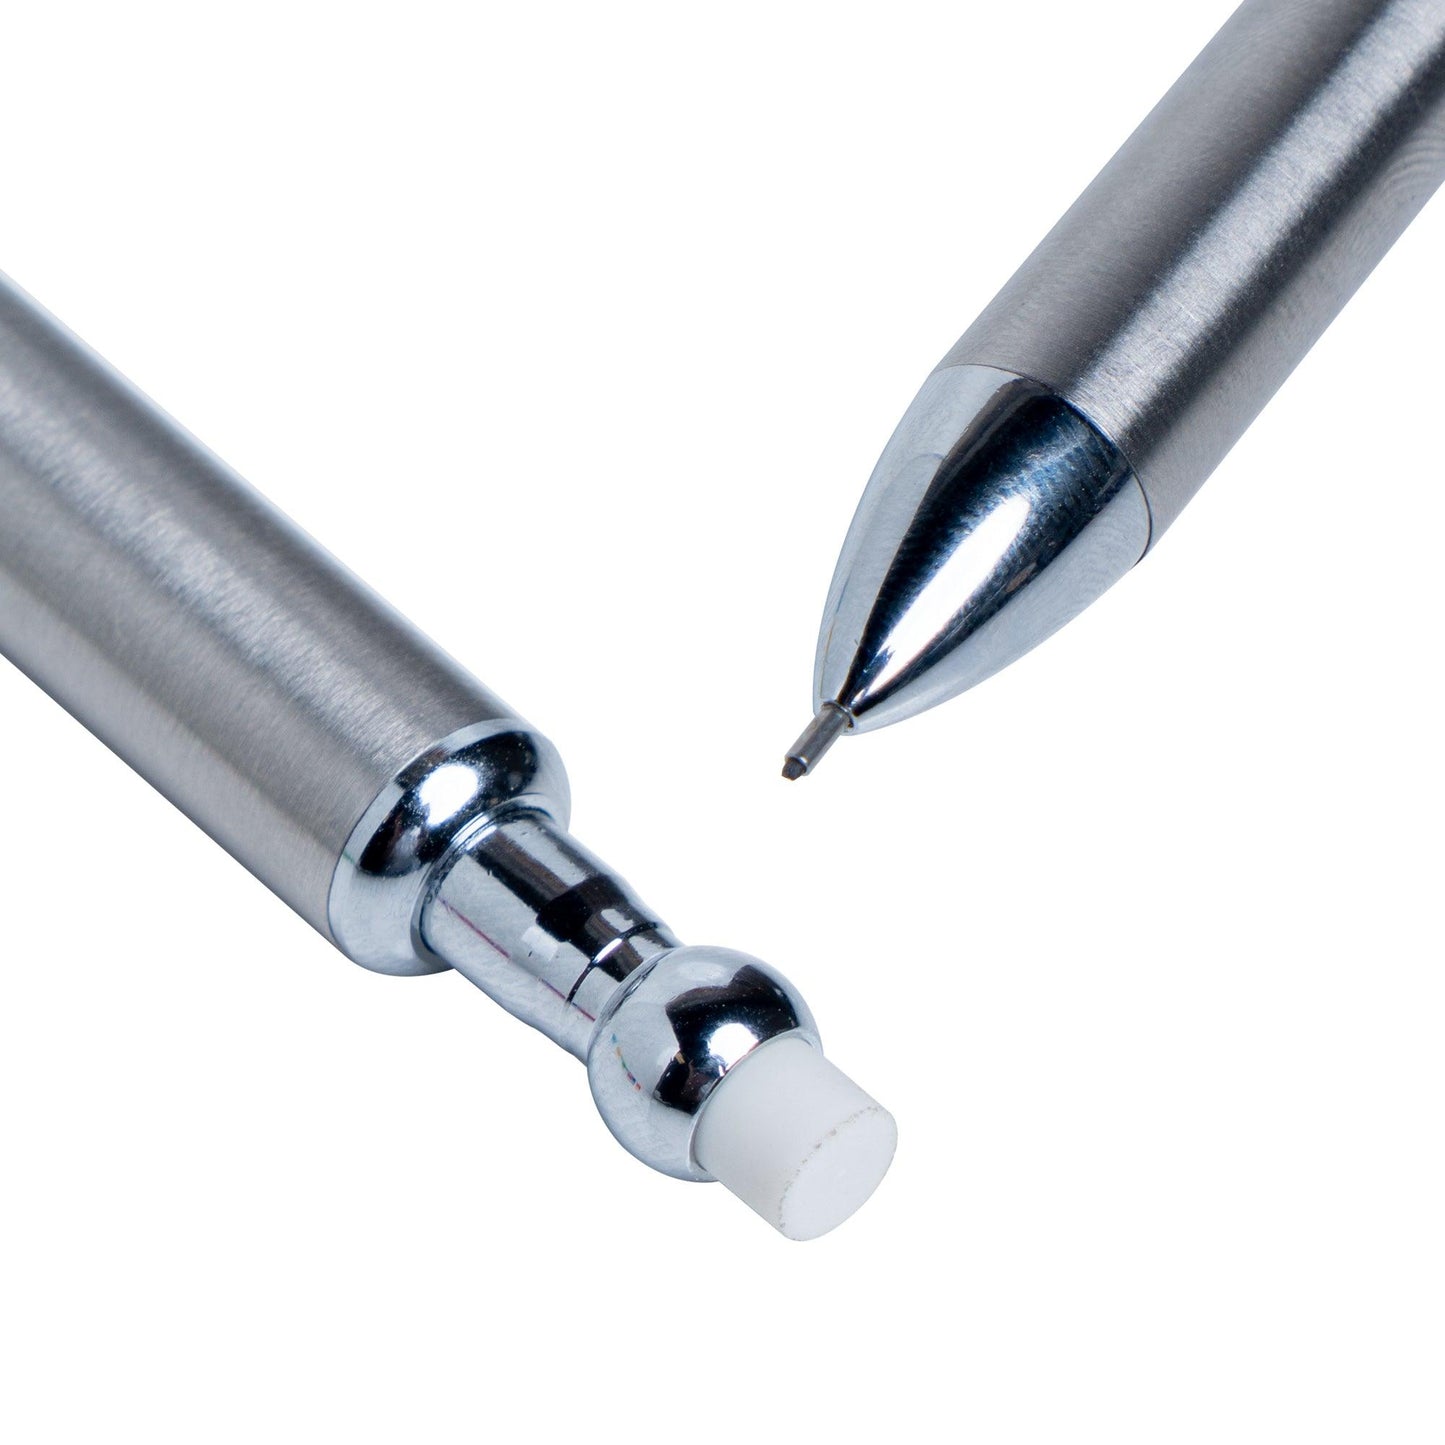 The Crafters Mechanical Pencil